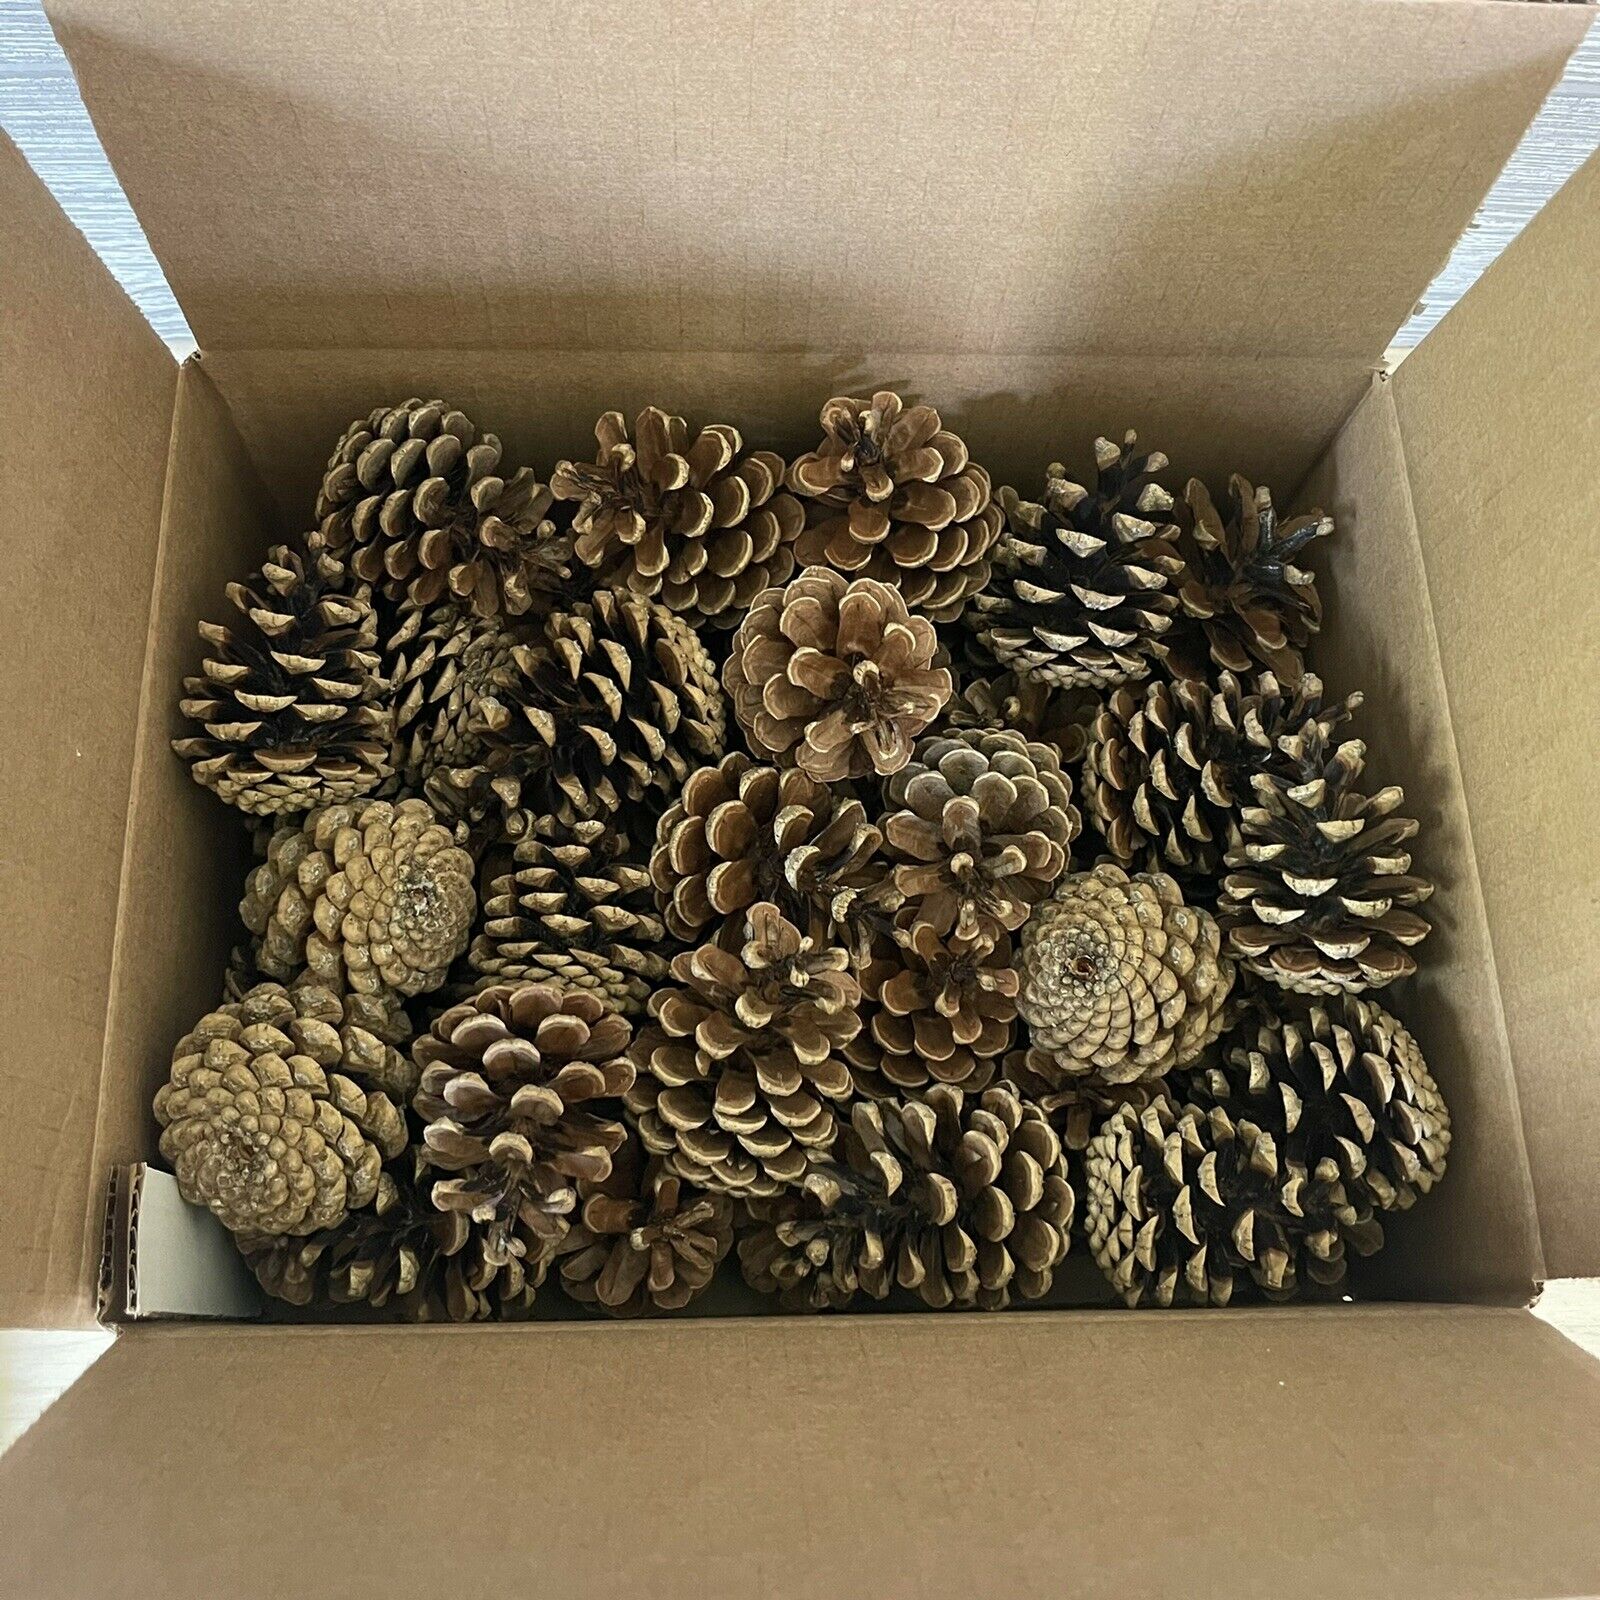 Oregon Pine Cones 2”-4” Crafting 45 Count Beautiful Brown Color Not Weathered